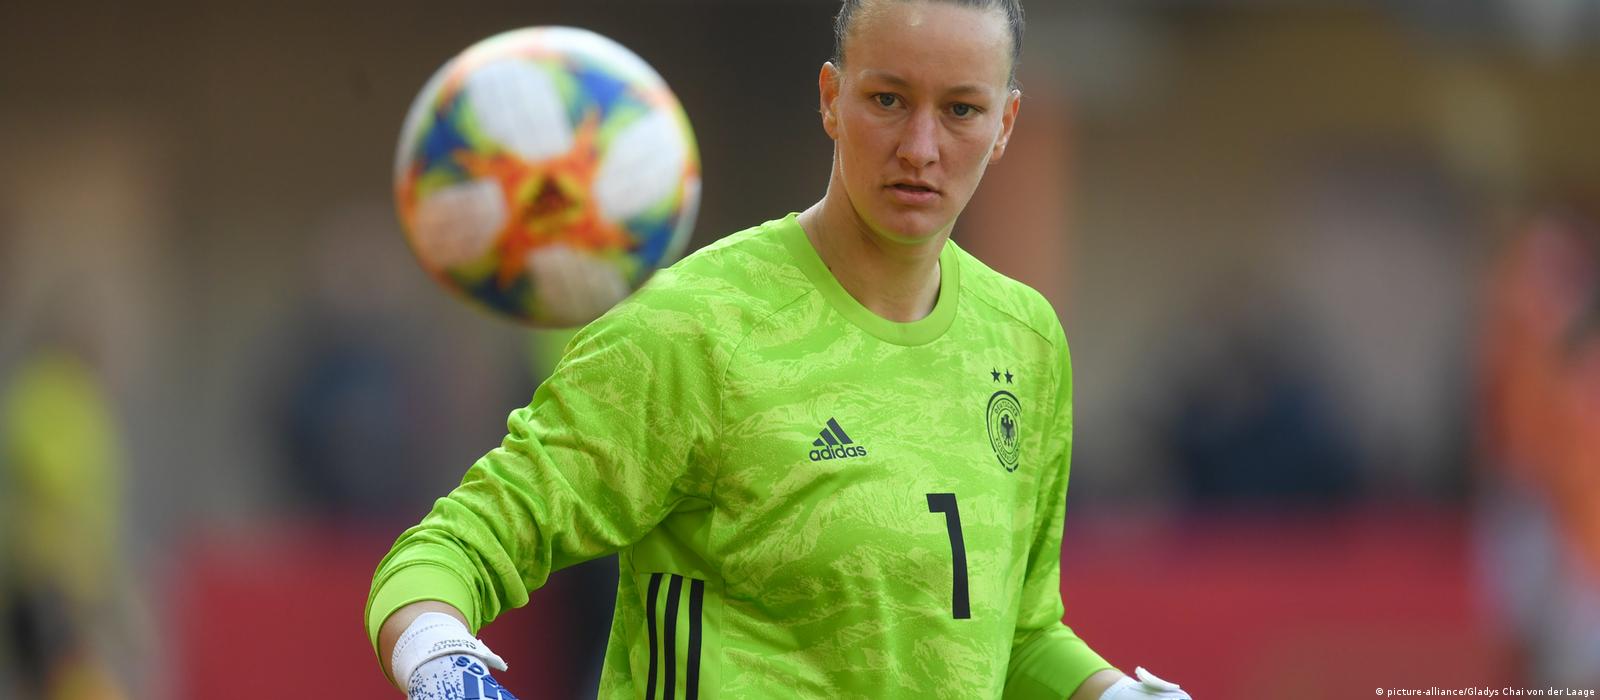 Many stars at Women's World Cup juggle parenthood while playing on big  stage